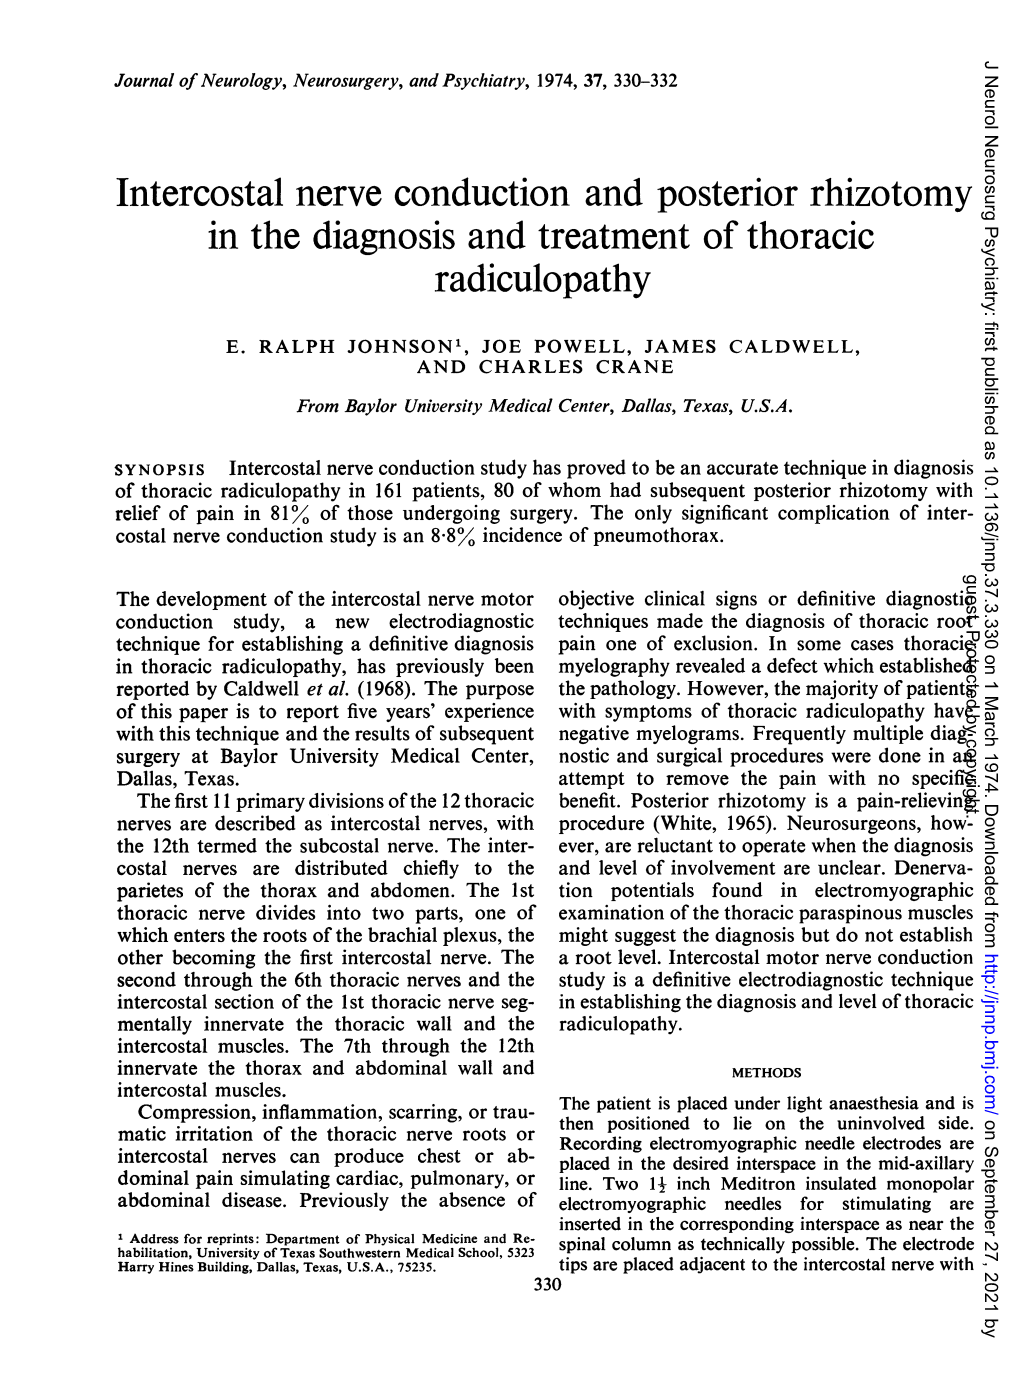 In the Diagnosis and Treatment of Thoracic Radiculopathy